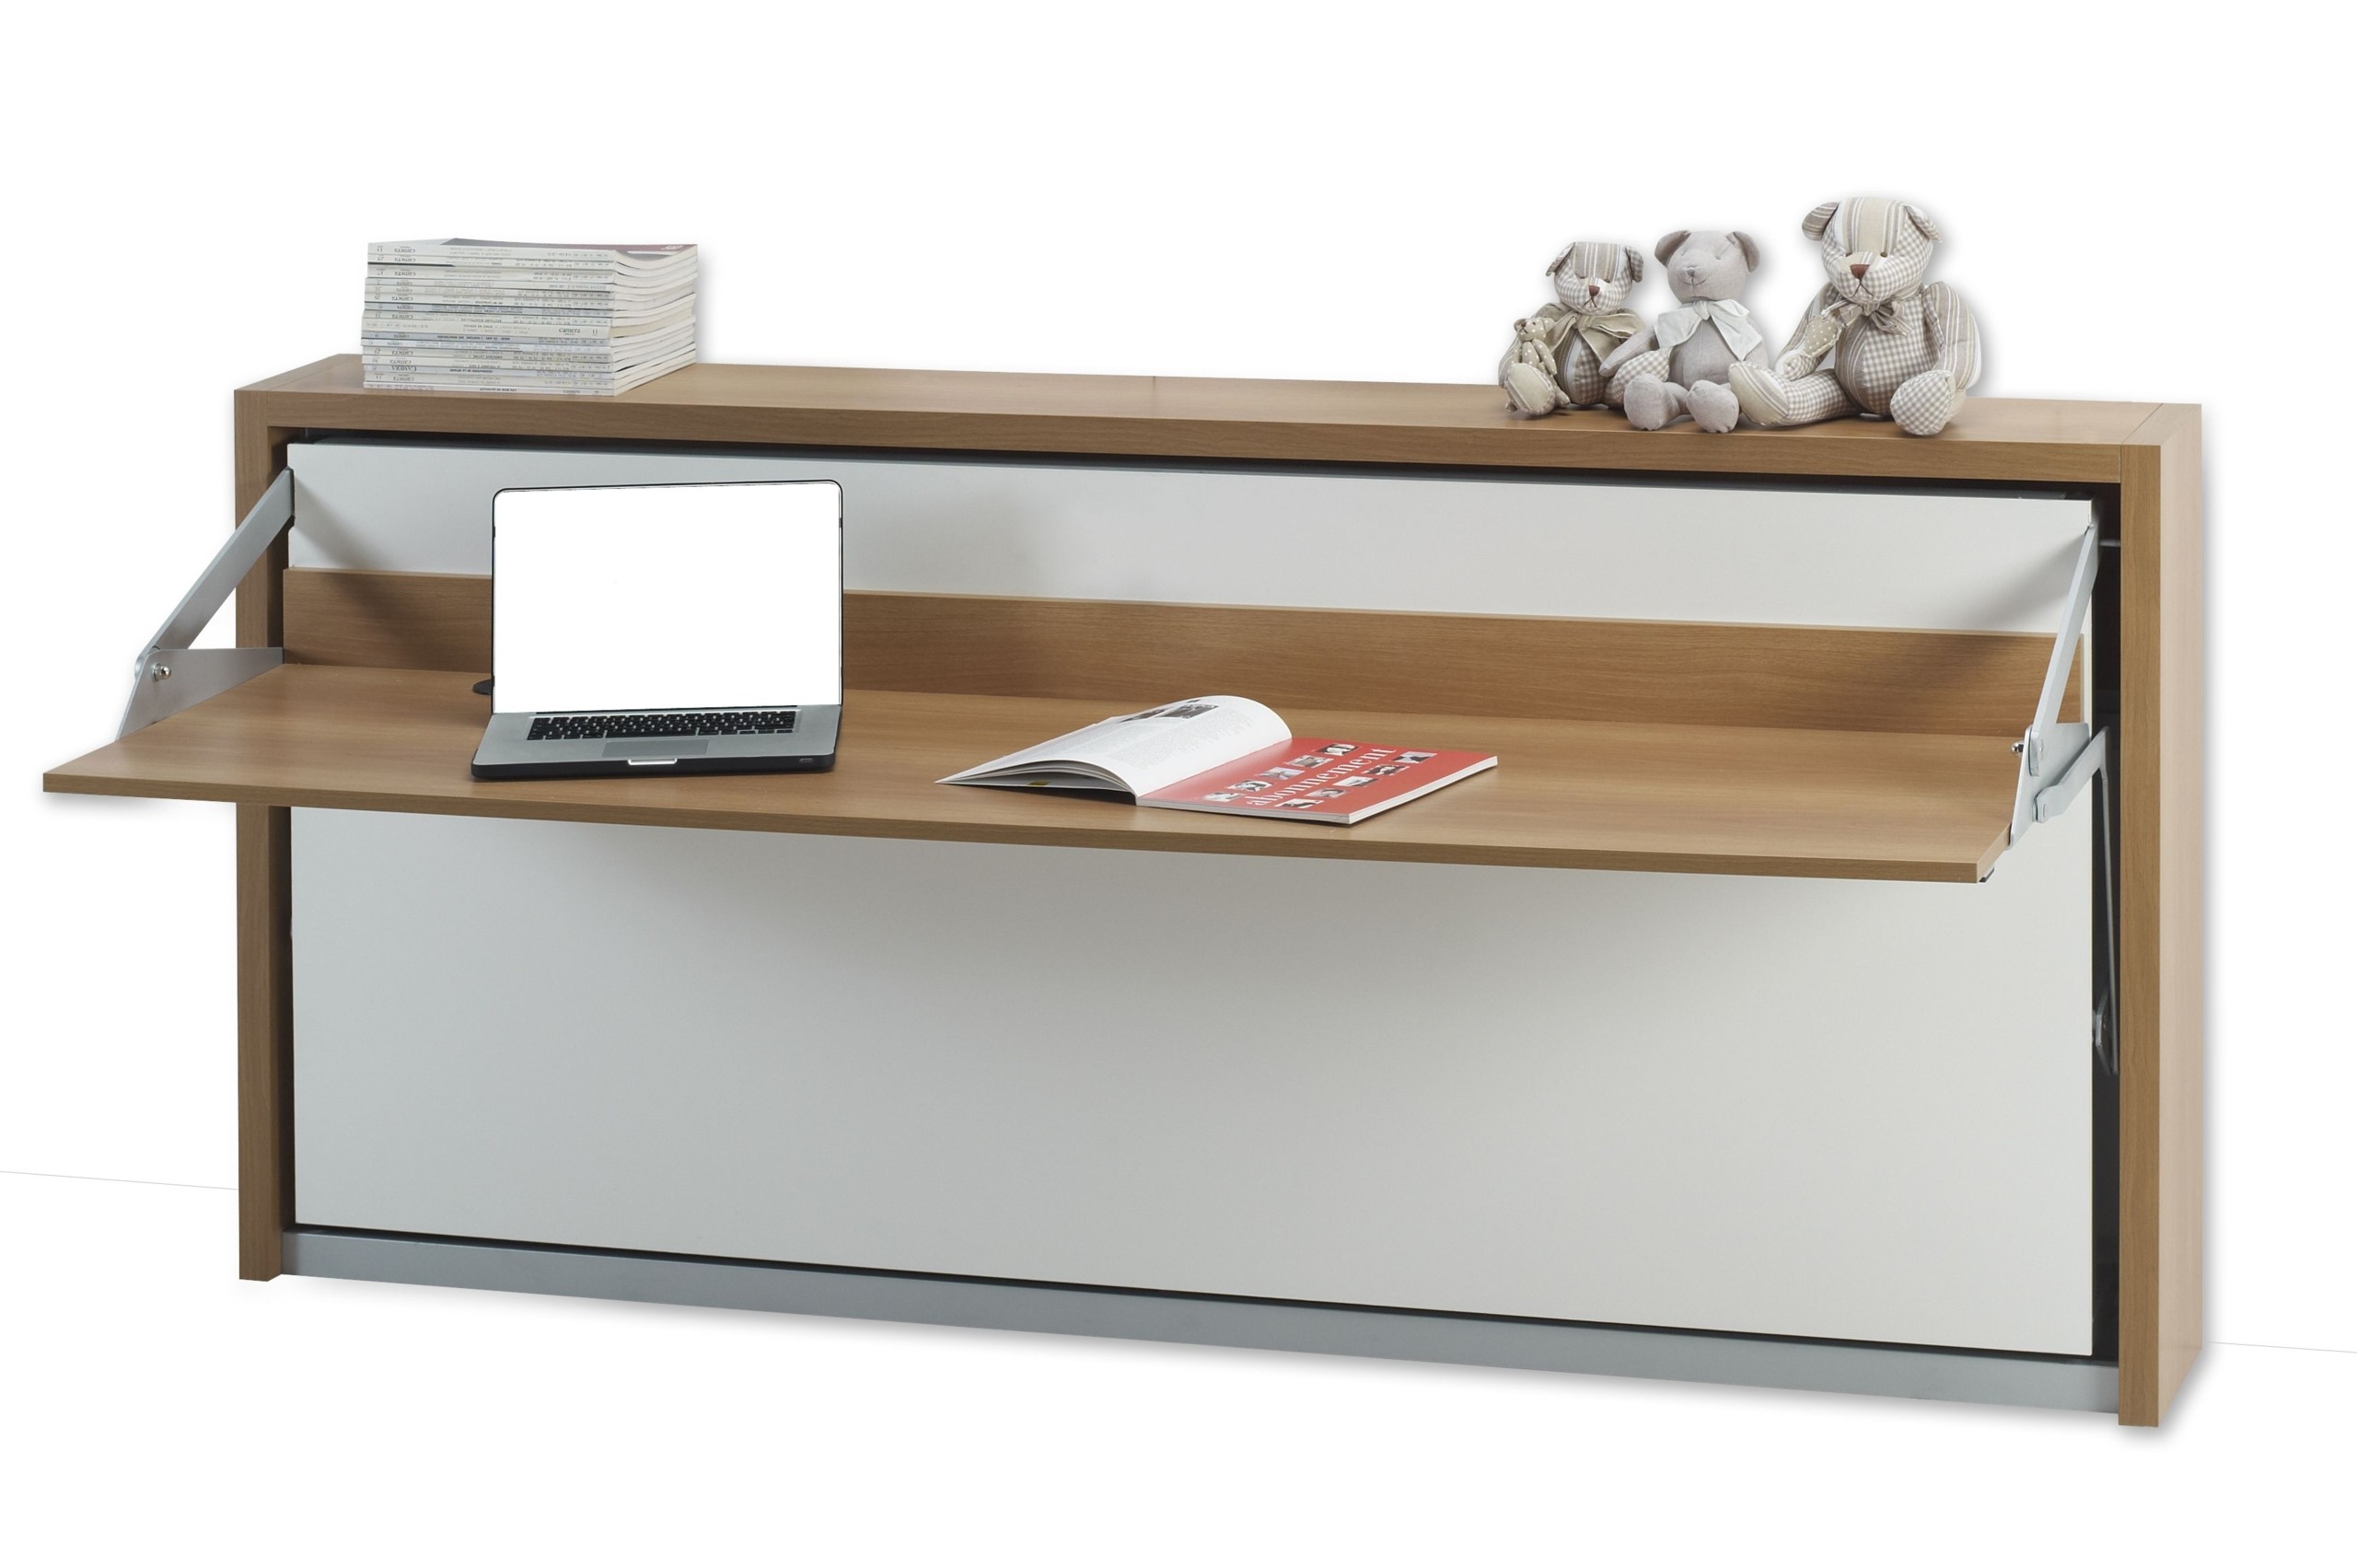 Desk bed is a transformable system made up of a